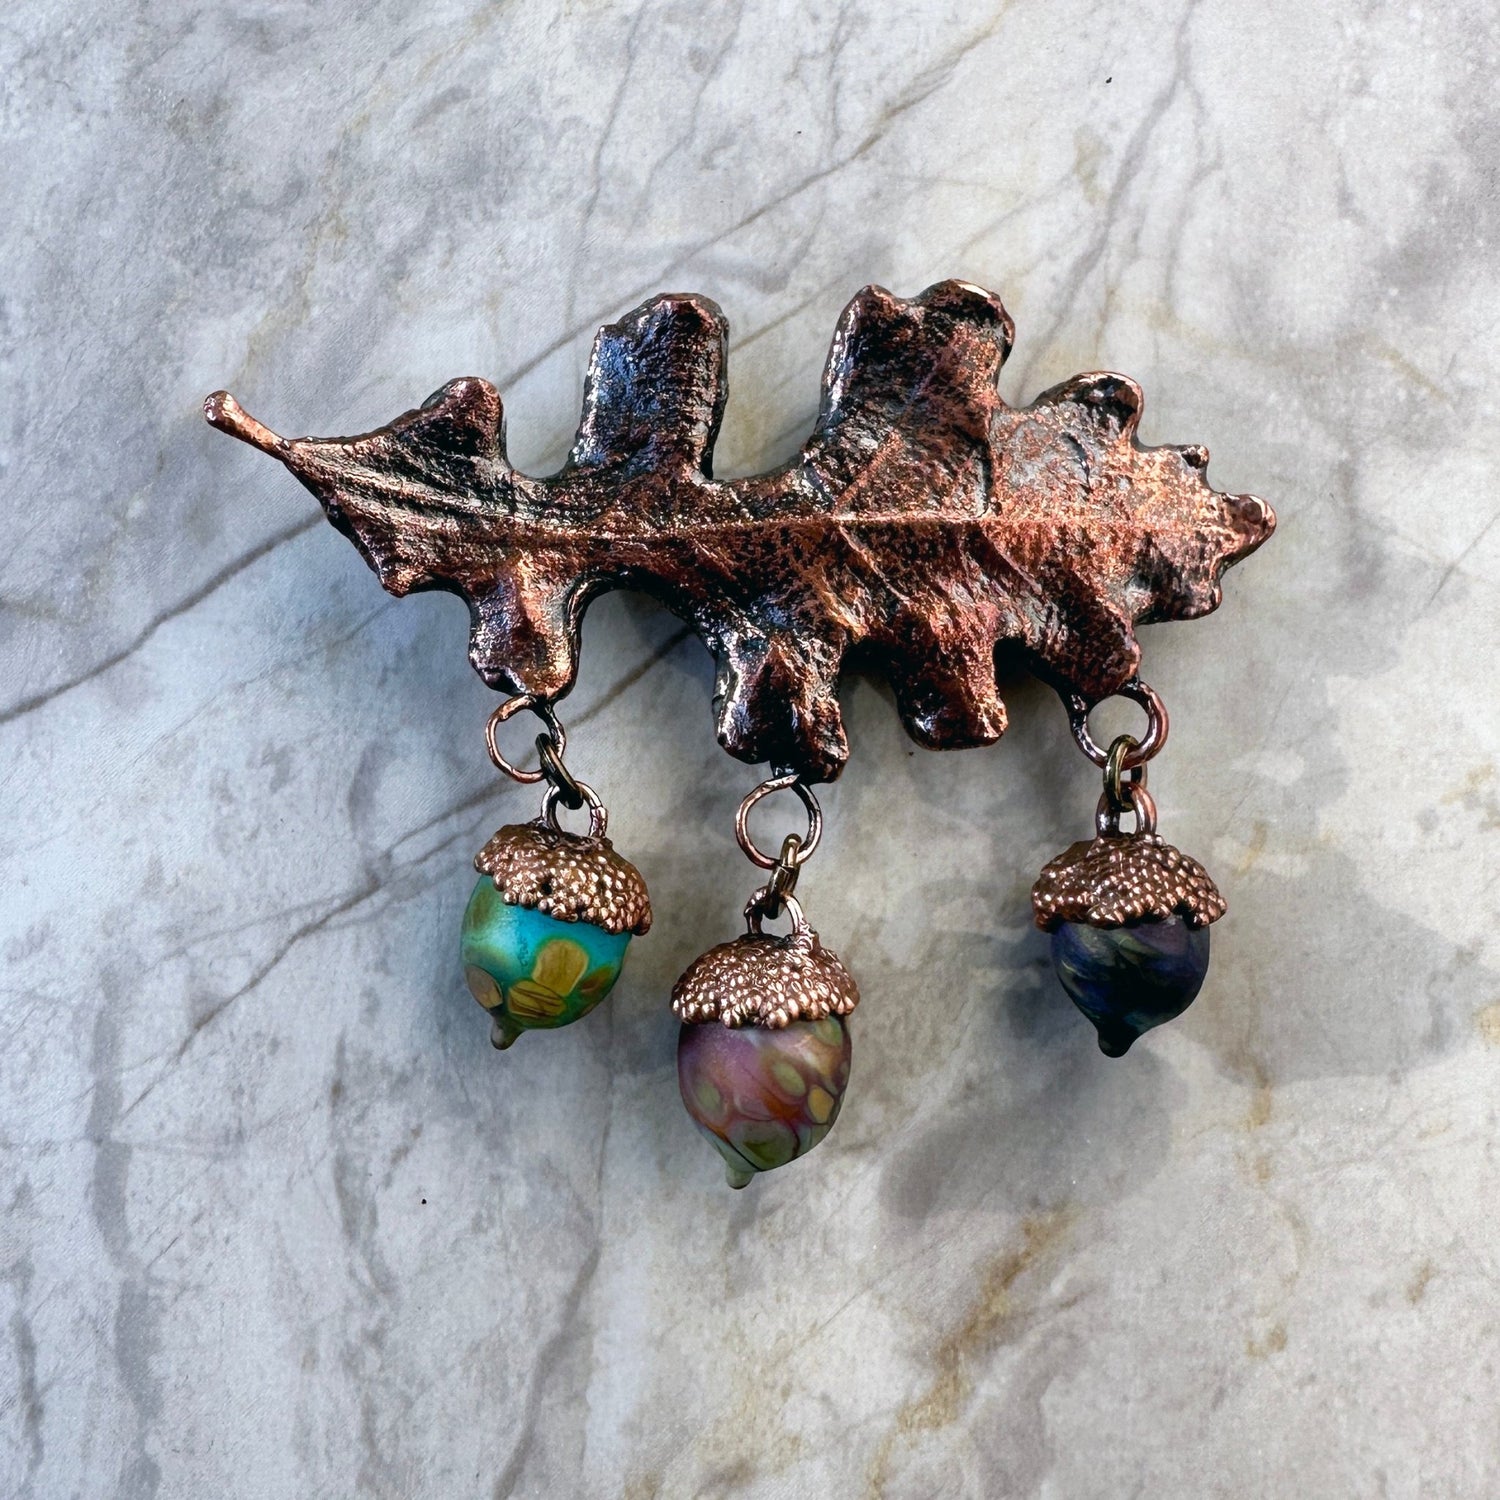 Glass and Copper Acorn Brooch - The Glass Acorn